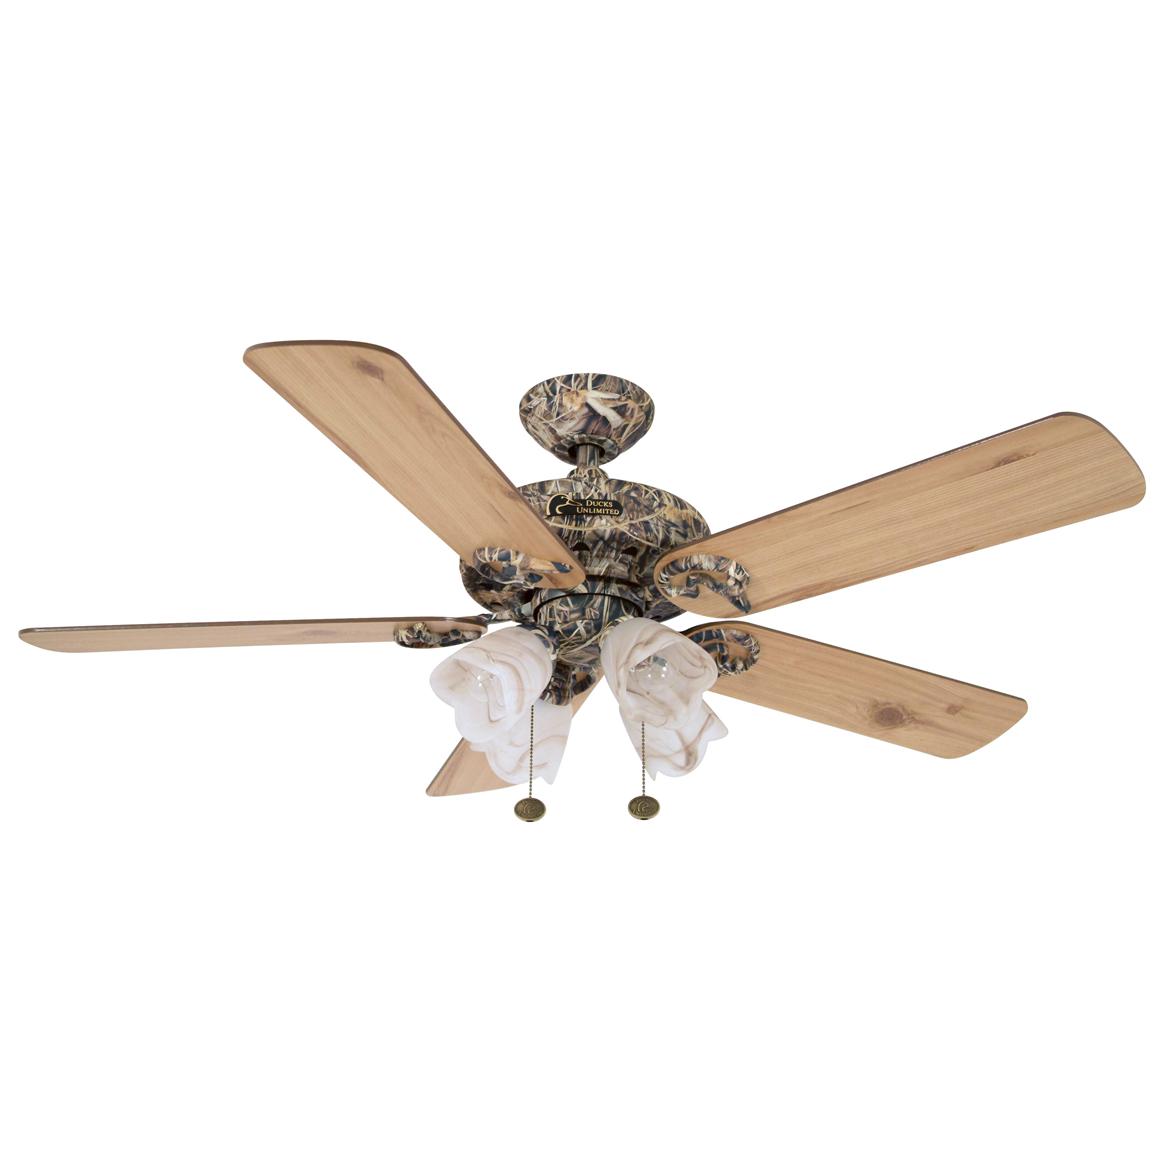 John Marshall Ducks Unlimited Max 4, Camouflage Ceiling Fans With Lights